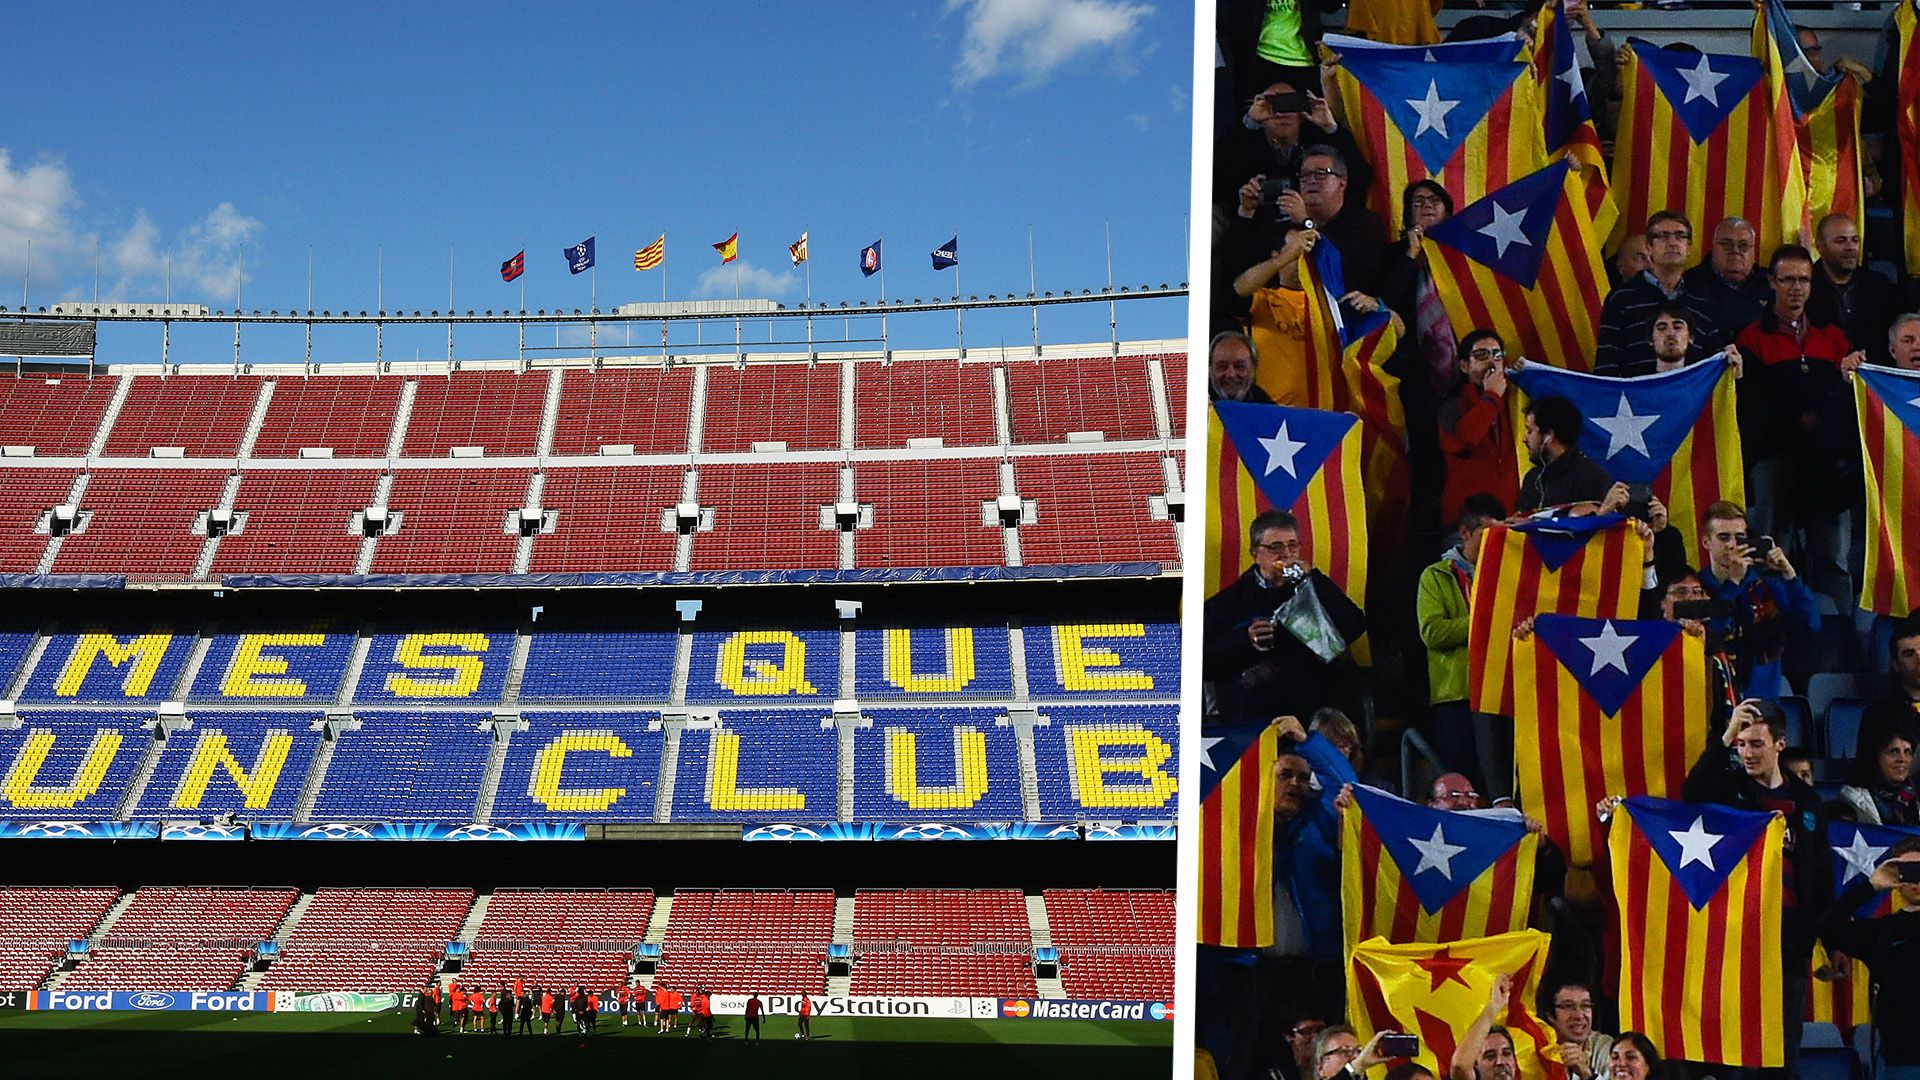 Mes que un club: Barcelona club motto meaning & history in Catalan independence